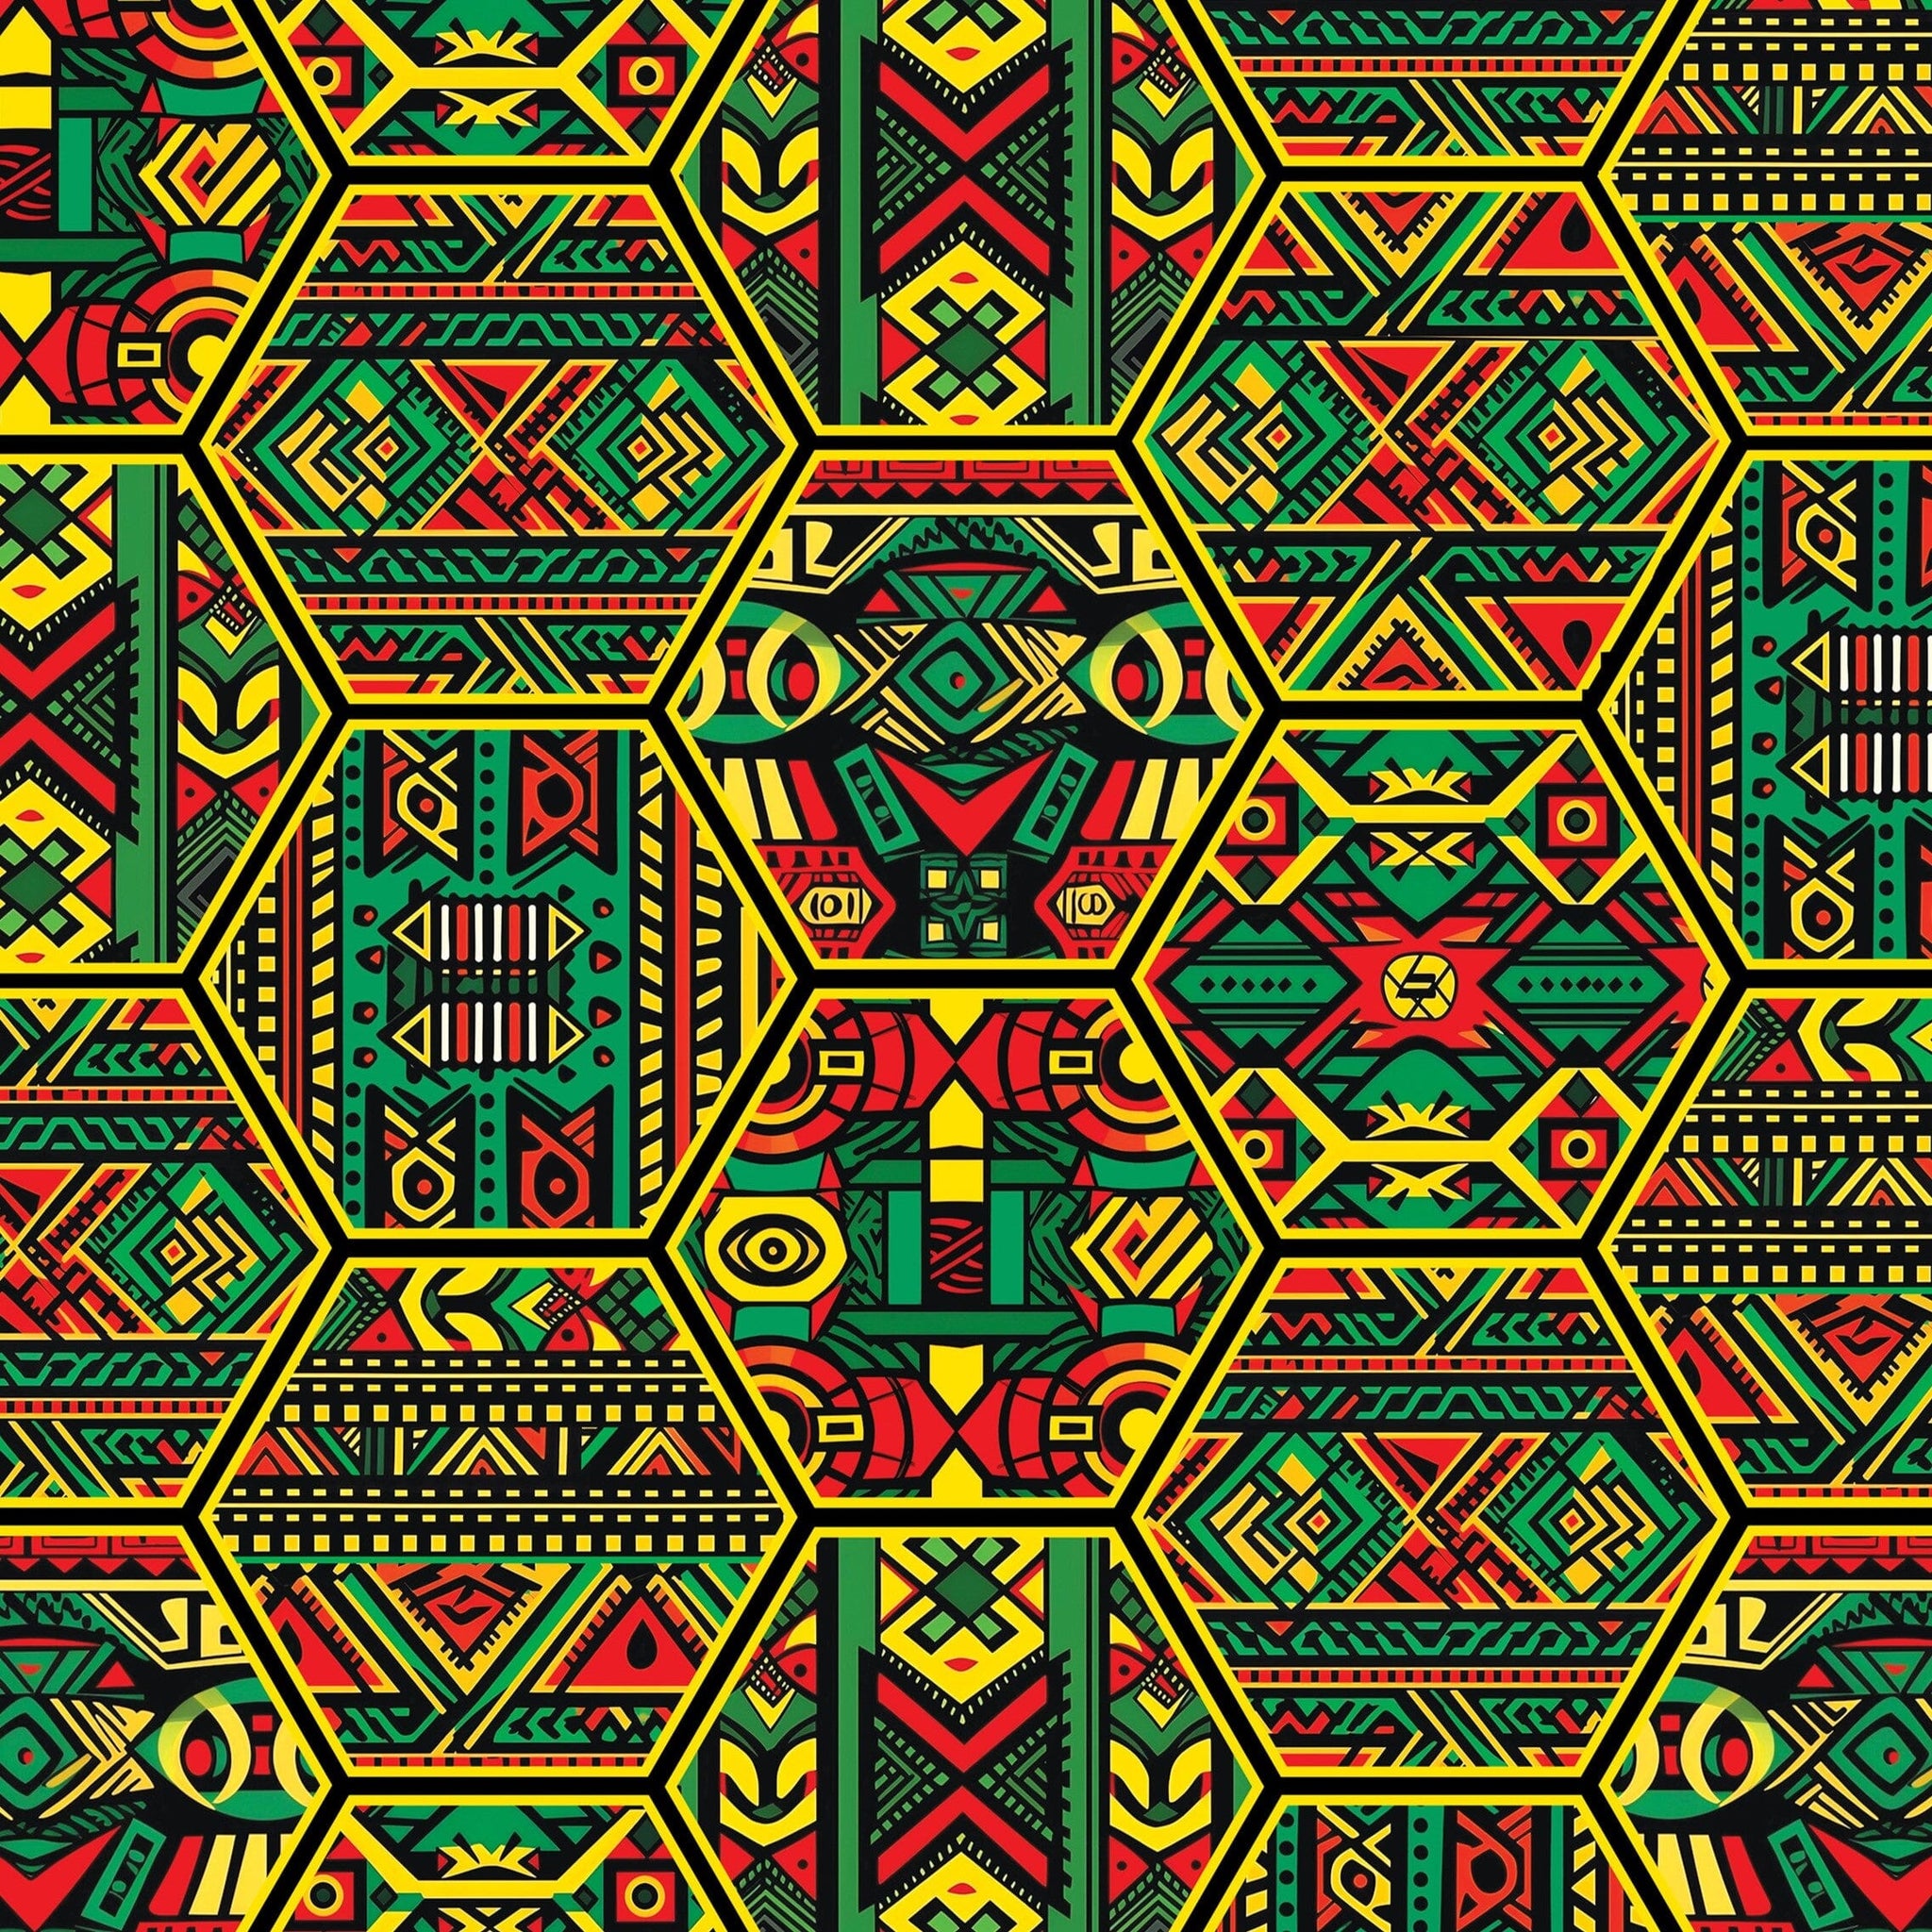 Hexagon African Patterns in Pan-African Colors Design